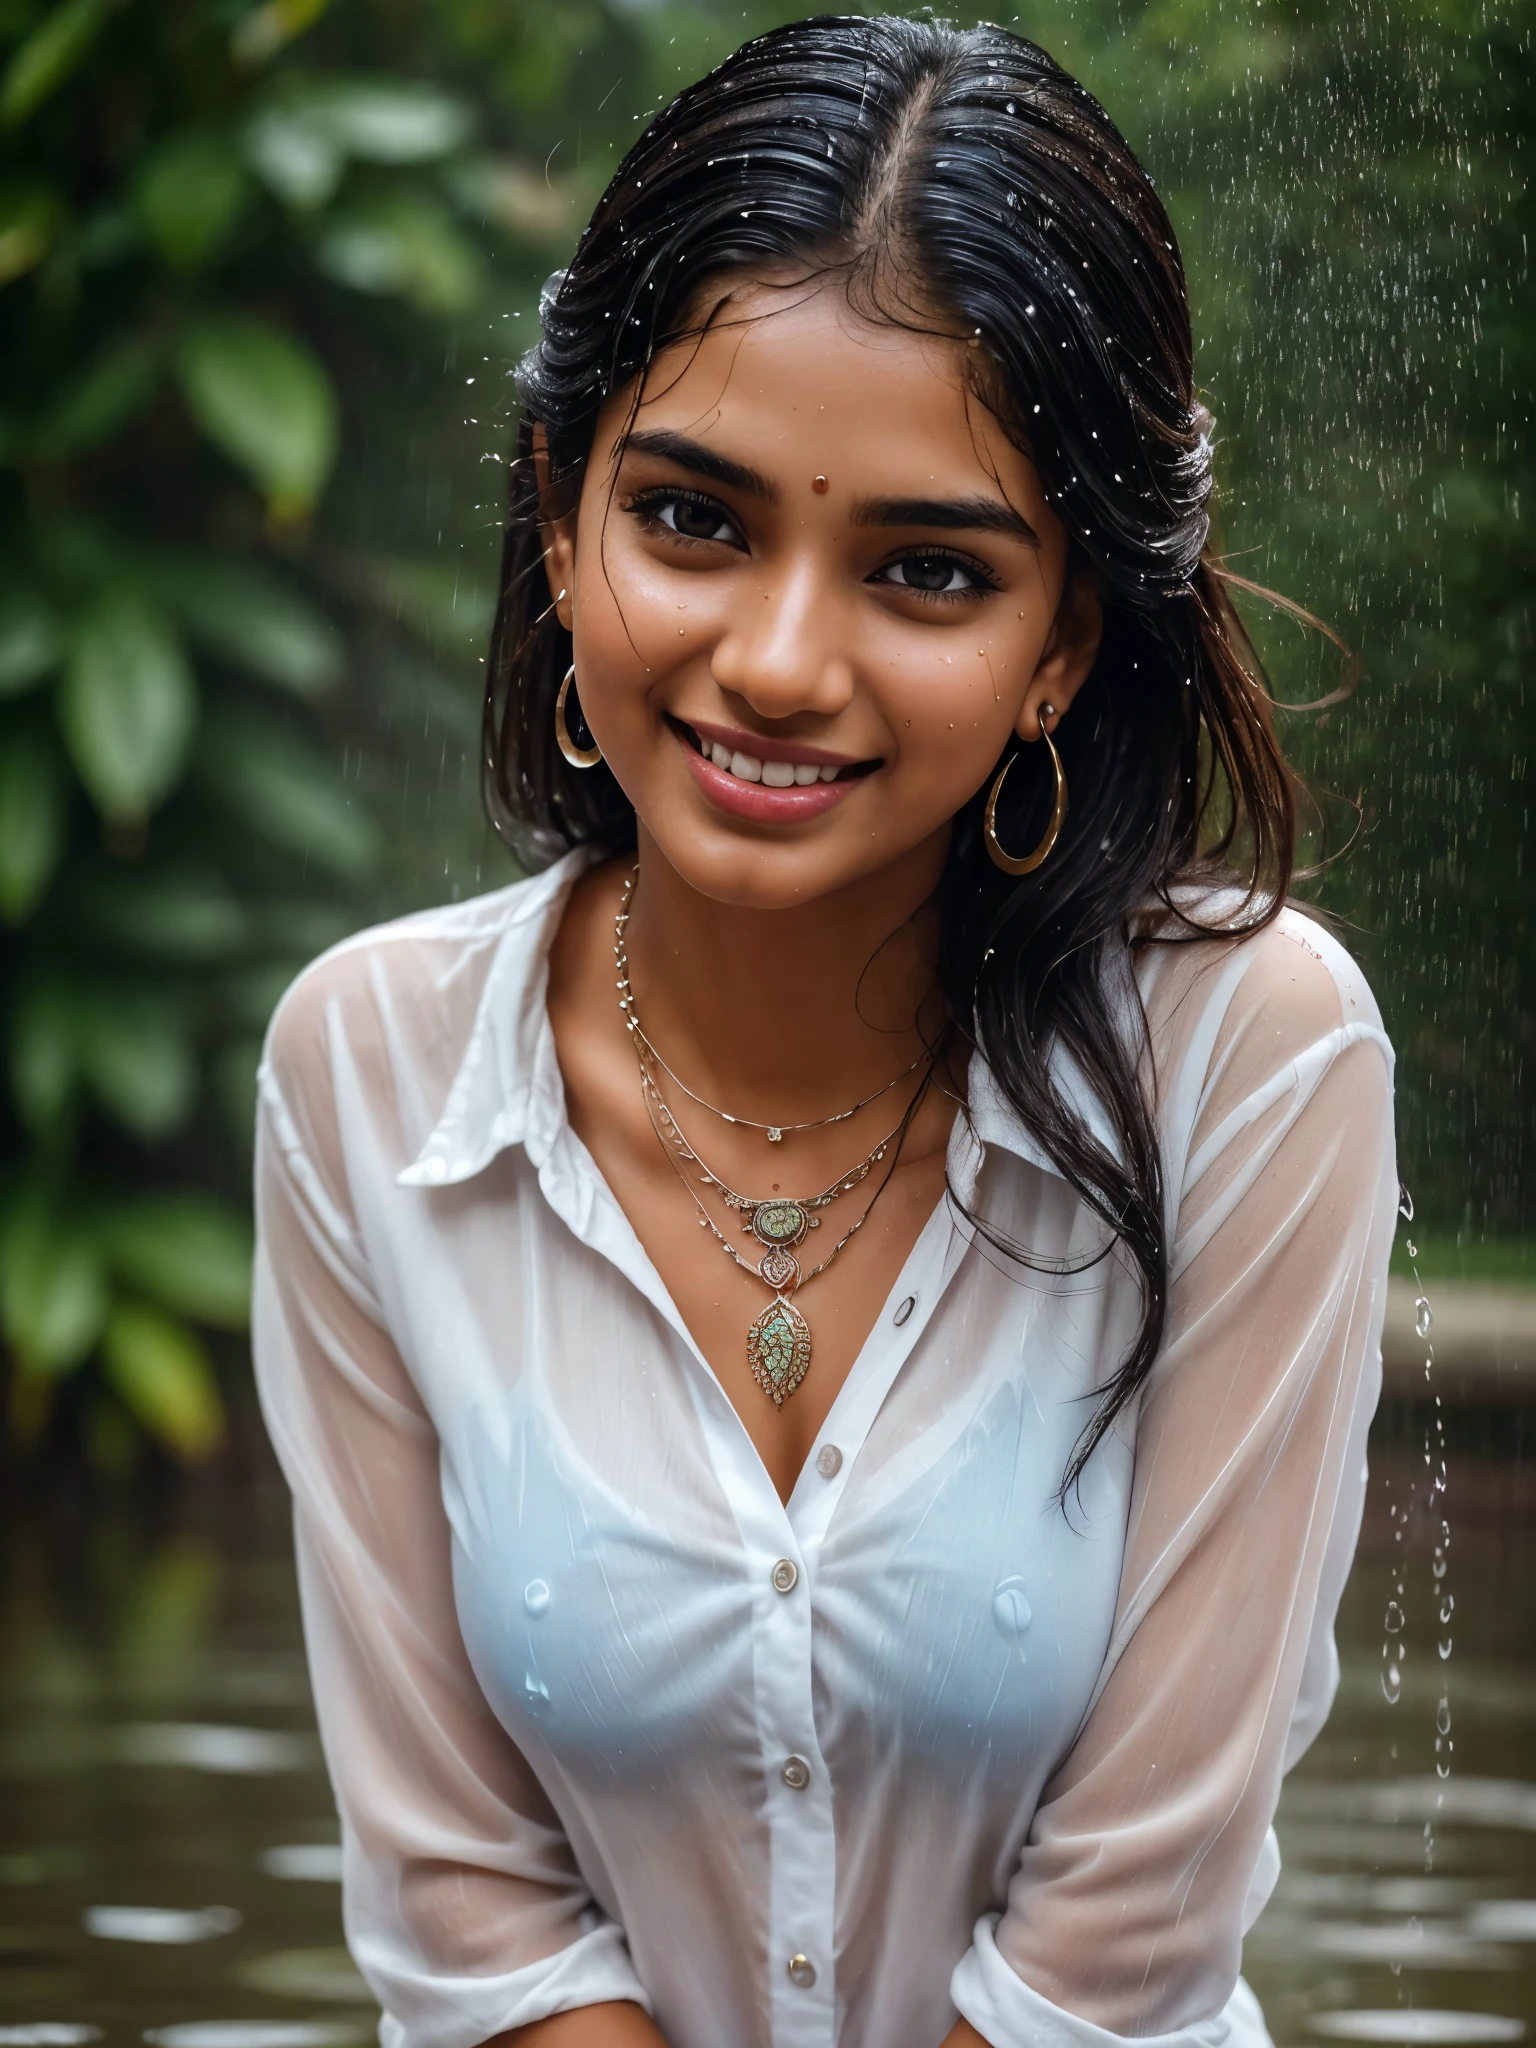 20 years old extremely beautiful brown Tamil girl (white shirt blue jeans), (bangles earrings necklace wrist watch), enjoying in the rain, drenched in rain, facing viewers facing camera, eyes symmetry, face symmetry, (best quality, ultra-detailed:1.6), colorful scene, bright color palette, playful atmosphere, vibrant colors, cute expressions, joyful laughter, raindrop reflections, wet hair, wet clothes, wet body, body reflecting light, back lit, refreshing ambiance, happy face, splashing water, raindrops falling around her, natural lighting, candid moments captured, lively mood, standing in a distance, (intricate detailing:1.6 faces & eyes & ears & nose & lips & skin & 5 fingers & curves & body parts)